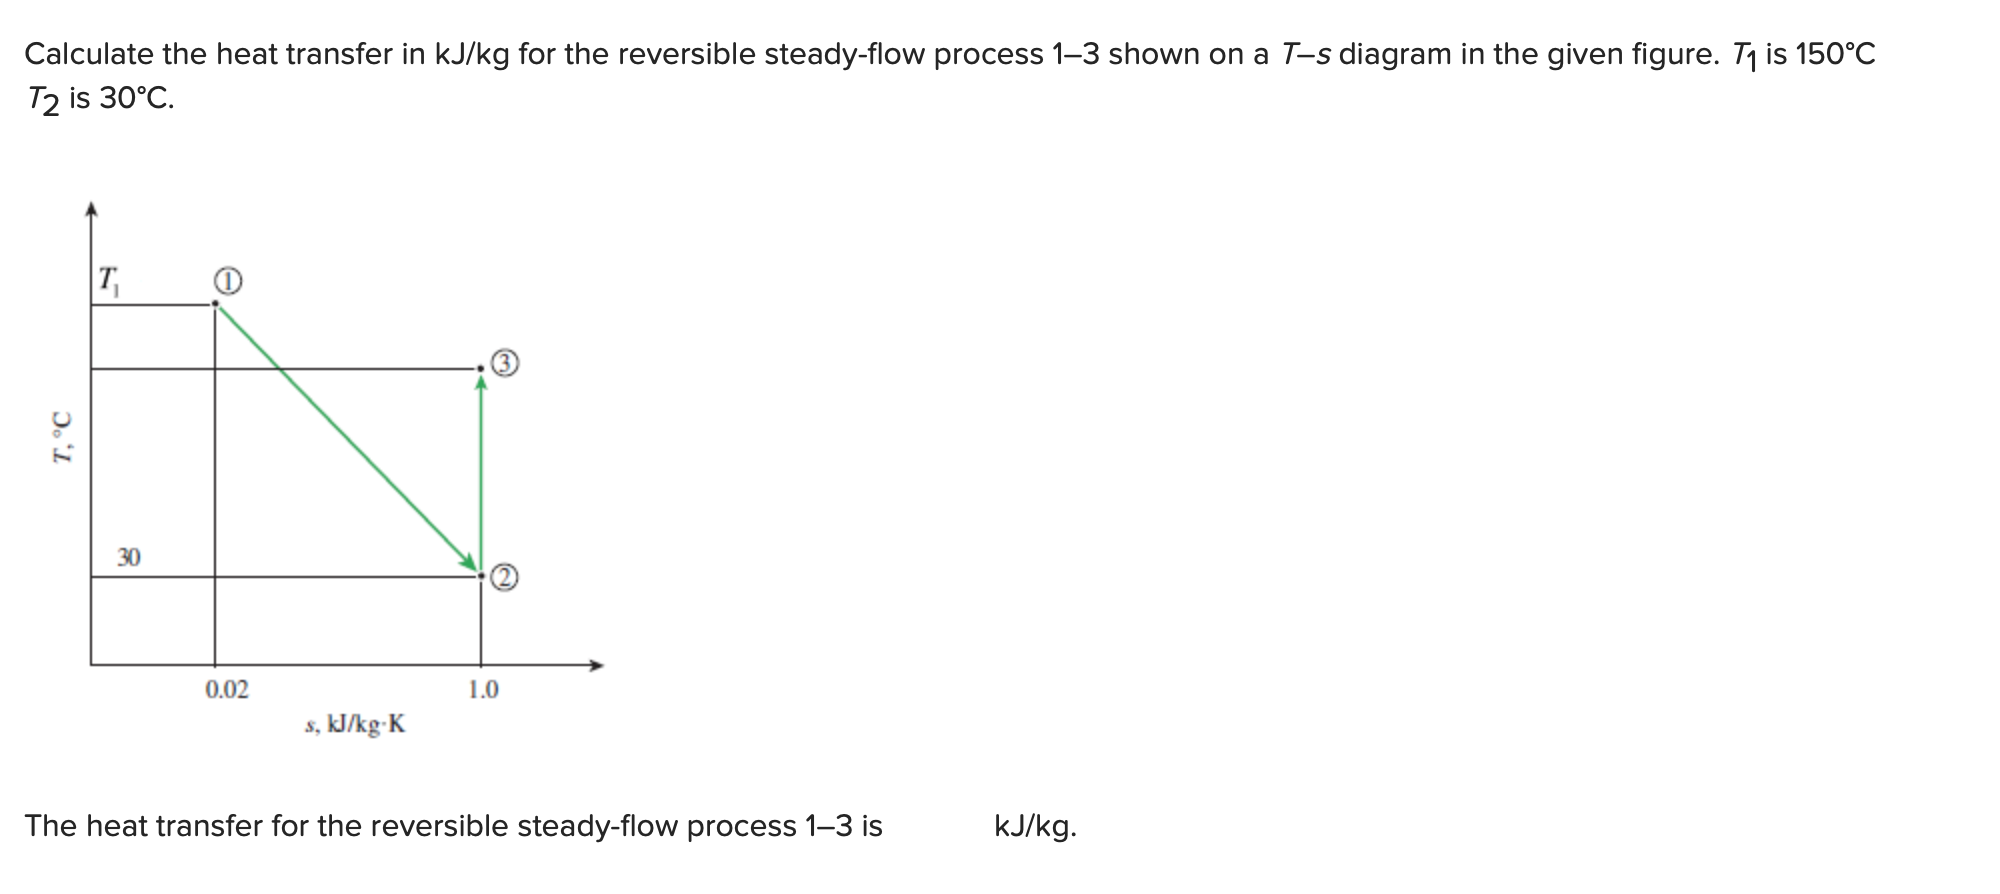 Calculate the heat transfer in kJ/kg for the reversible steady-flow process 1-3 shown on a T-s diagram in the given figure. T1 is 150°C
T2 is 30°C
7T7
30
0.02
1.0
s, kJ/kg-K
The heat transfer for the reversible steady-flow process 1-3 is
kJ/kg.
T,°C
